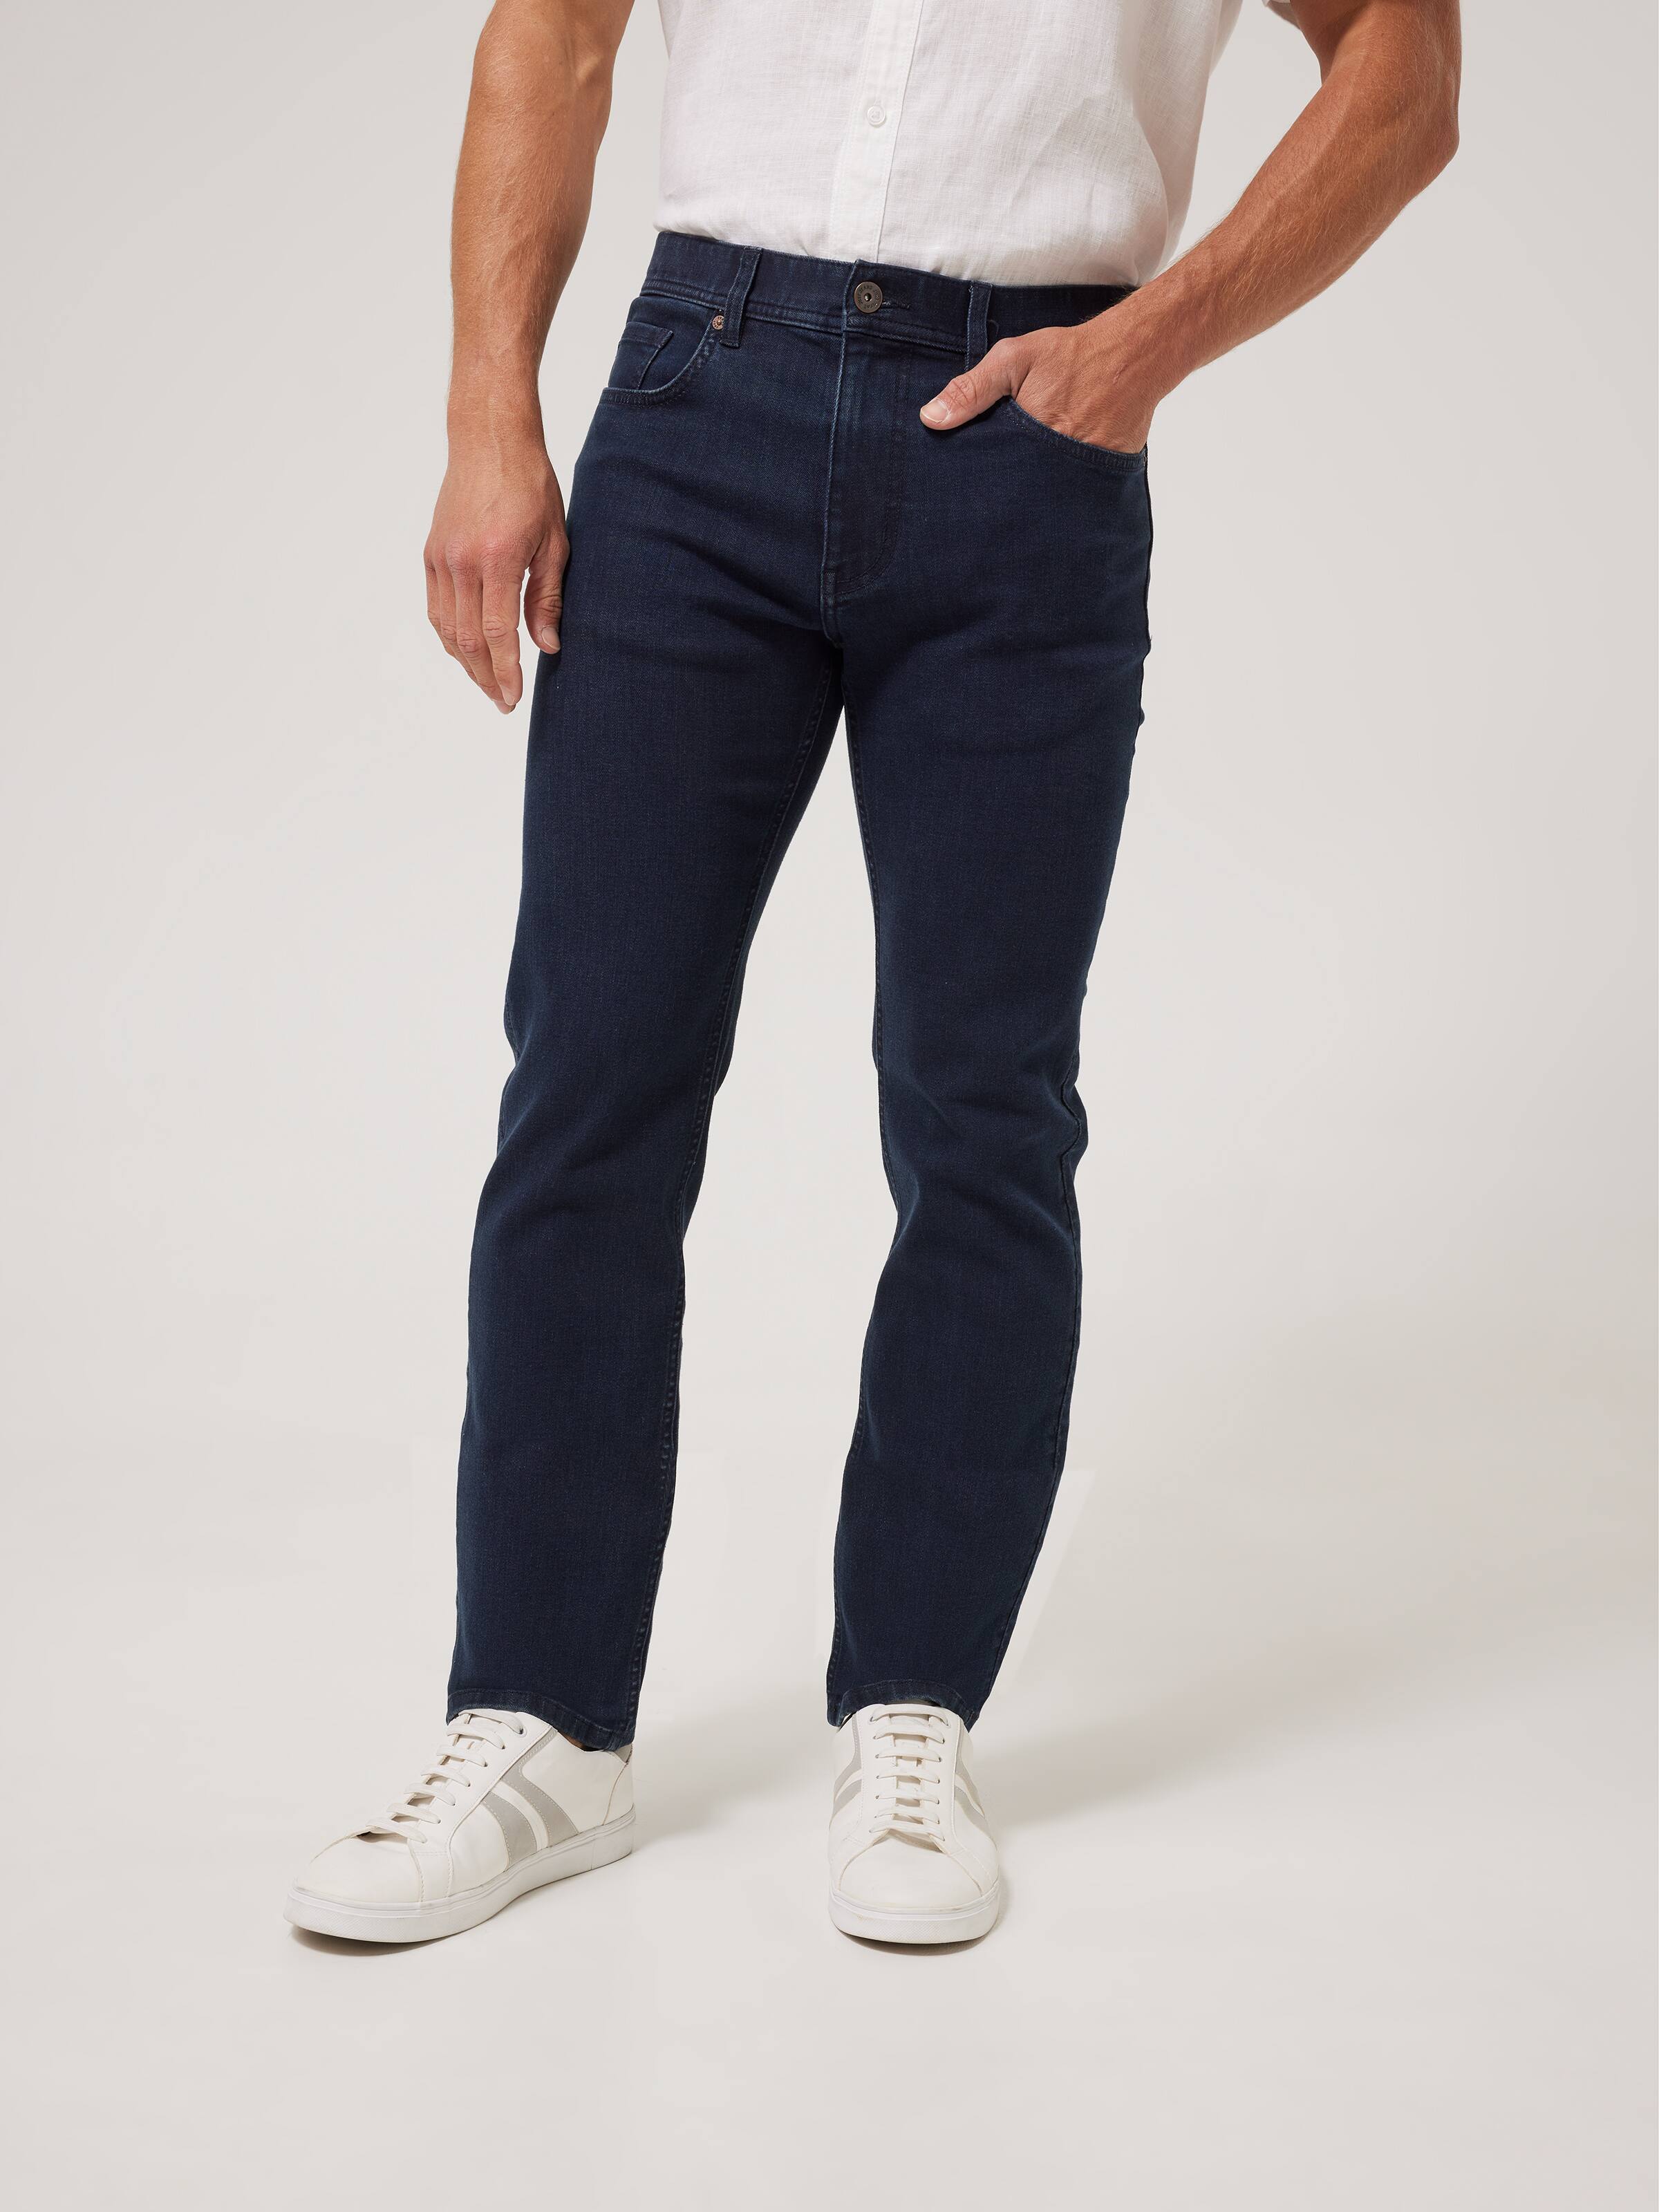 Mens Cropped Jeans, Denim Jeans Online NZ, Buy Mens Cropped Jeans  Clothing New Zealand